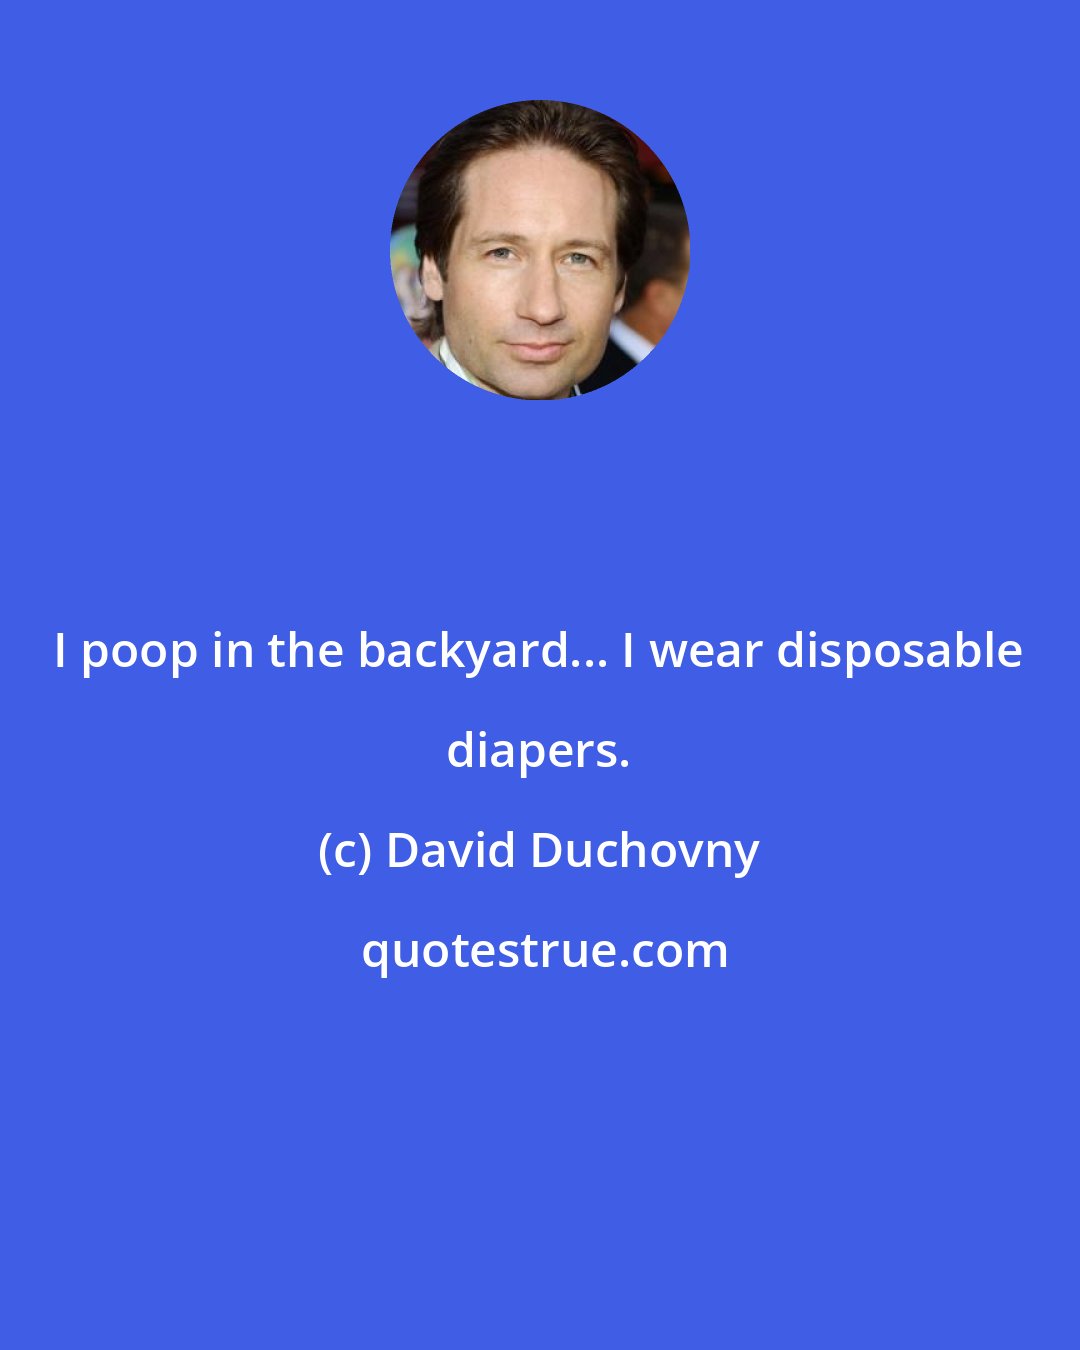 David Duchovny: I poop in the backyard... I wear disposable diapers.